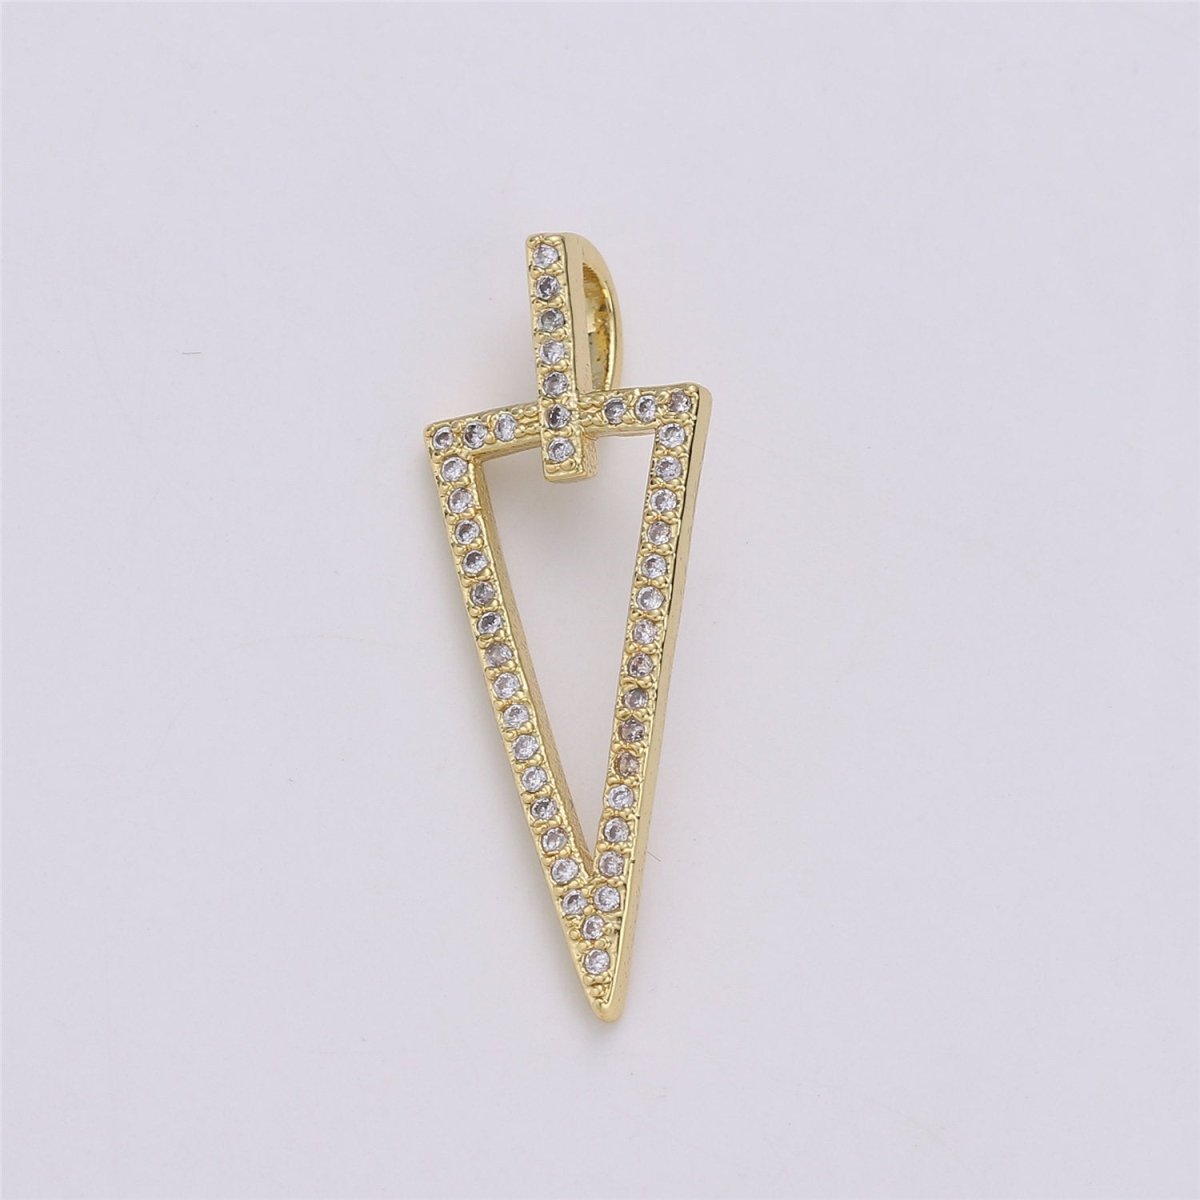 14k Gold Filled Arrowhead Pendant Charm Triangle Necklace Charm Micro Pave geometric Jewelry Supply 32x11mm, C-859 - DLUXCA